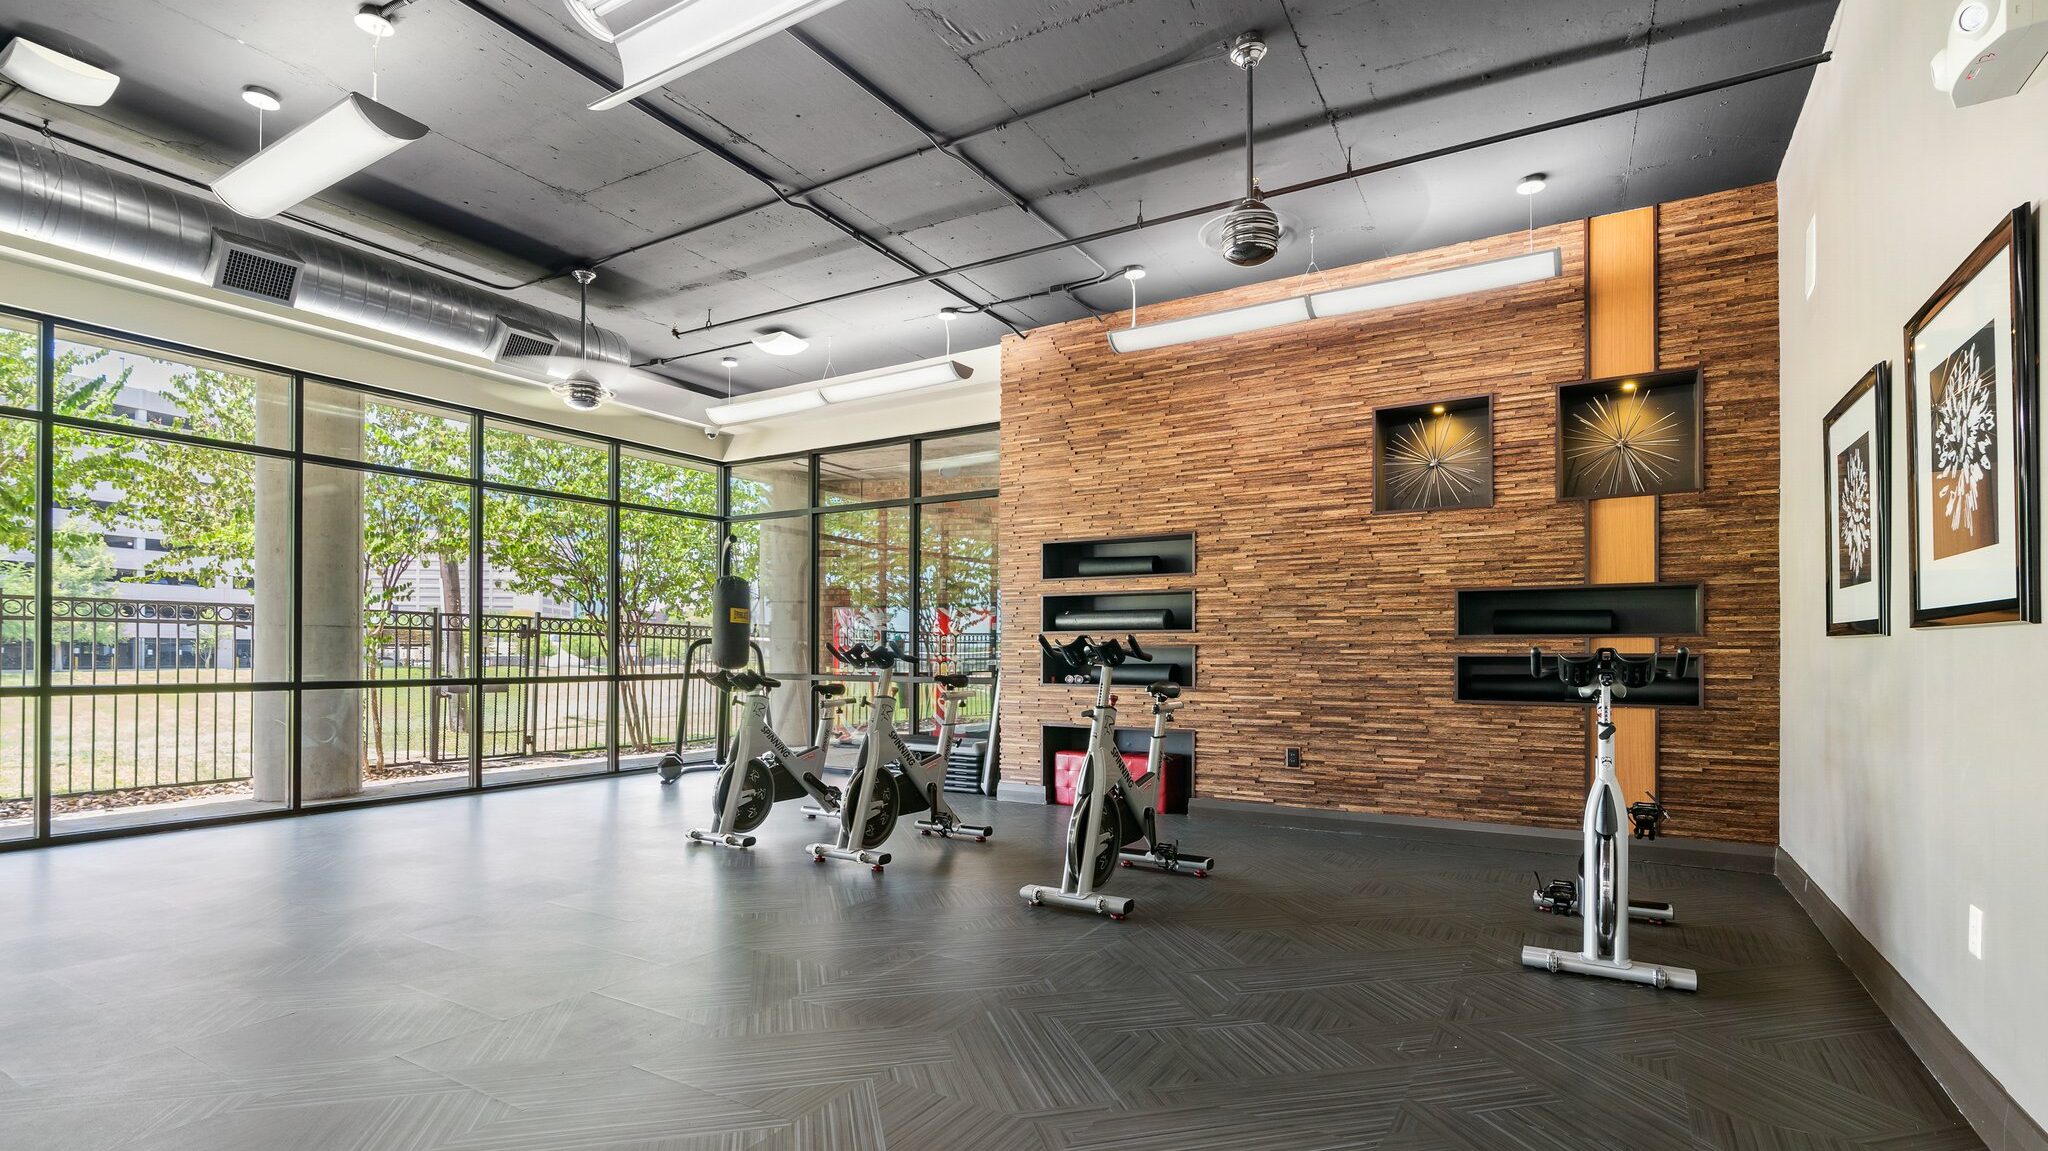 The yoga, fitness class, and spinning studio at Elan Med Center